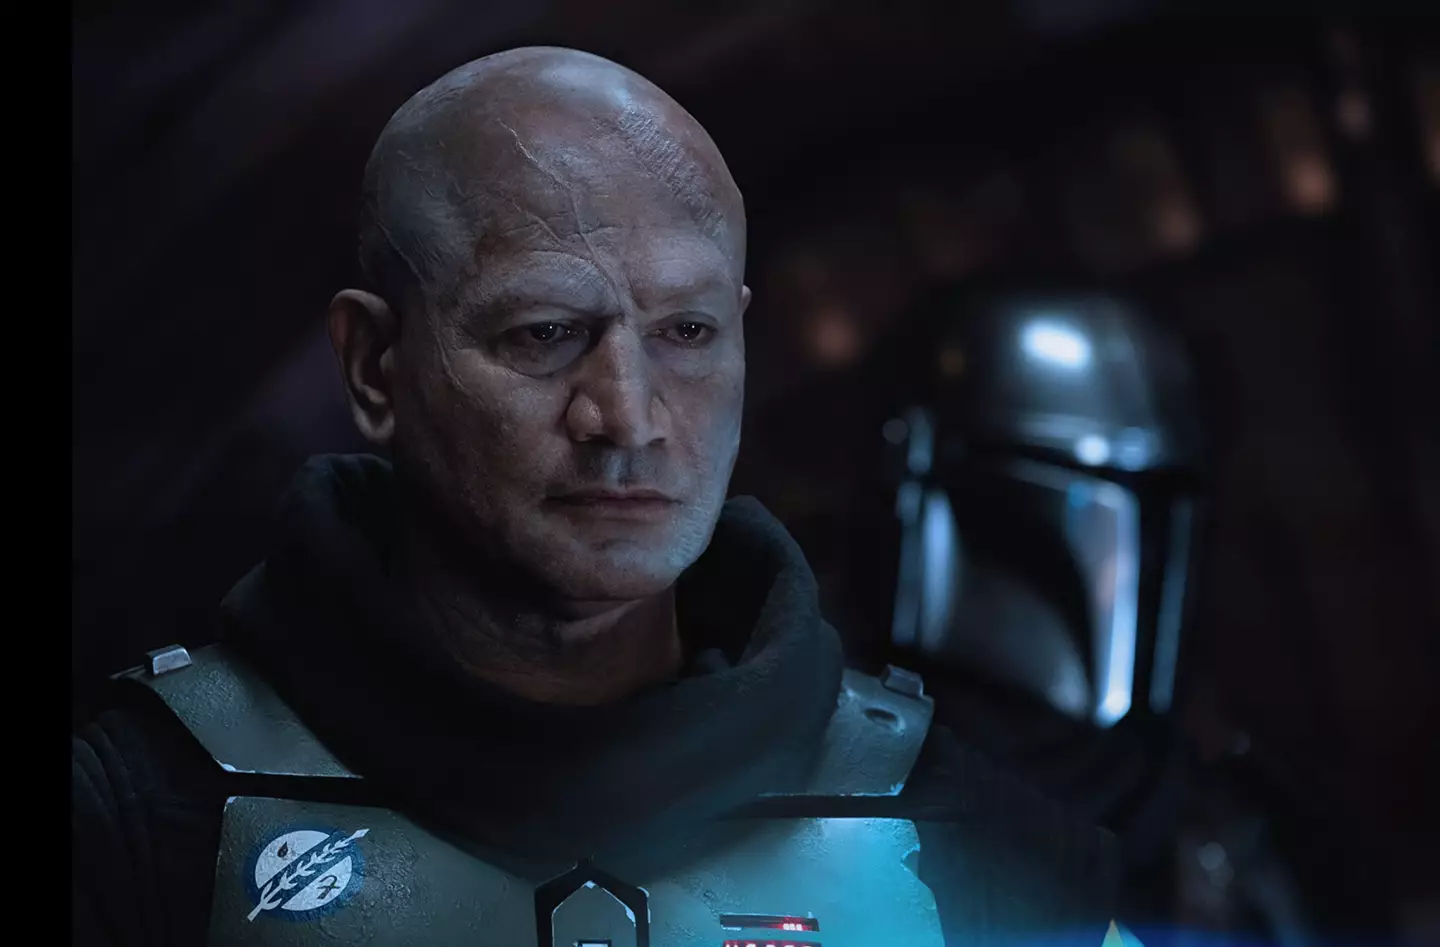 The Boba Fett actor was expected to be invited back to star in season three of The Mandalorian.